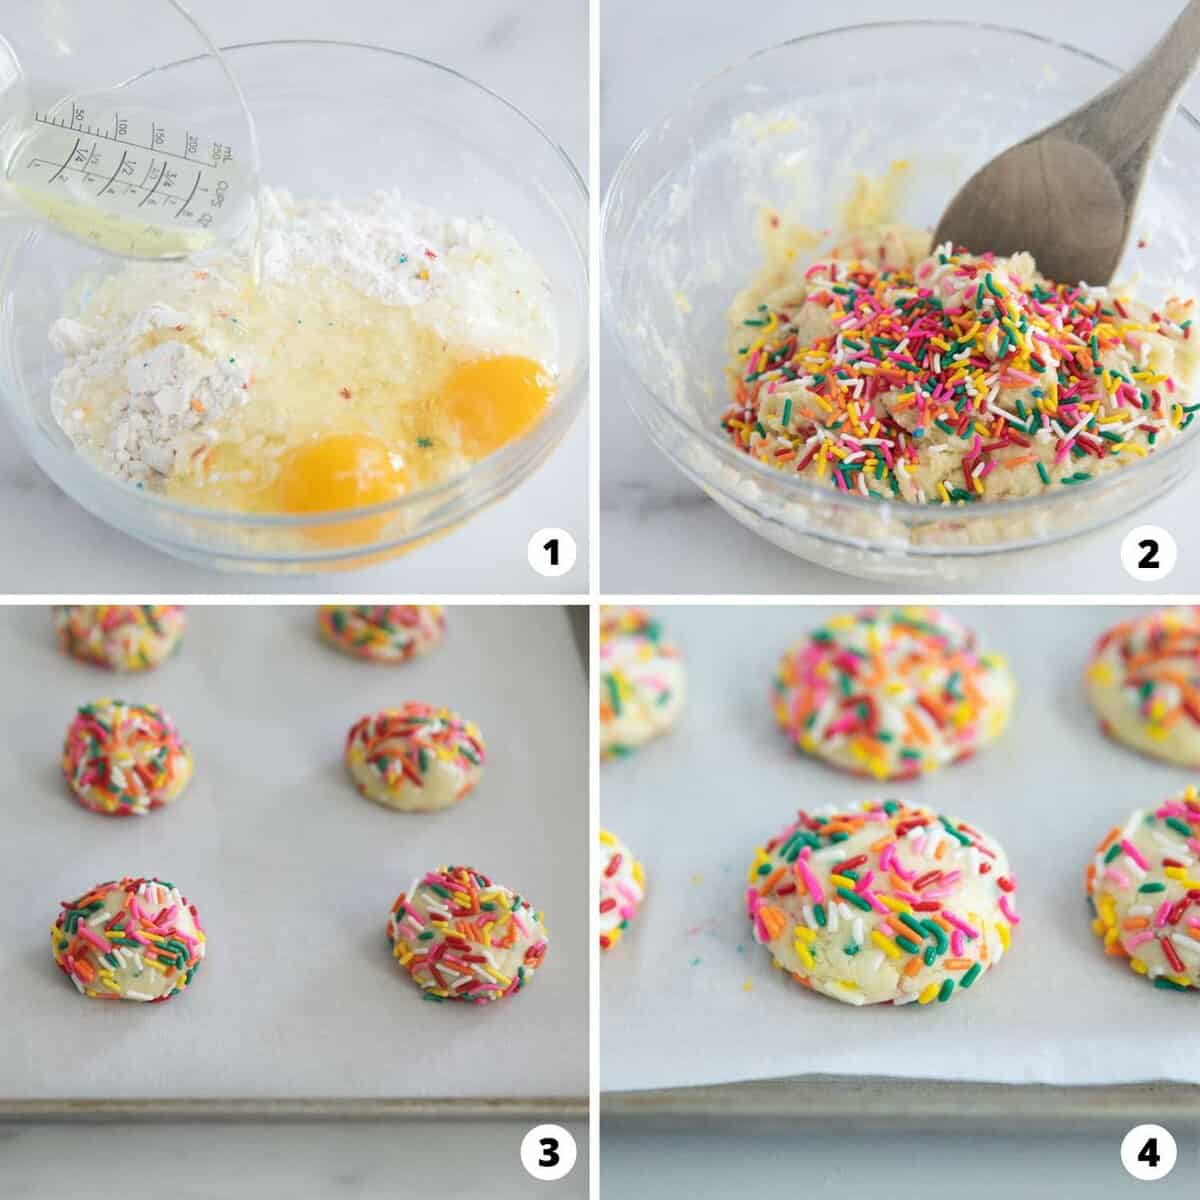 Showing how to make cake mix cookies in a 4 step collage.